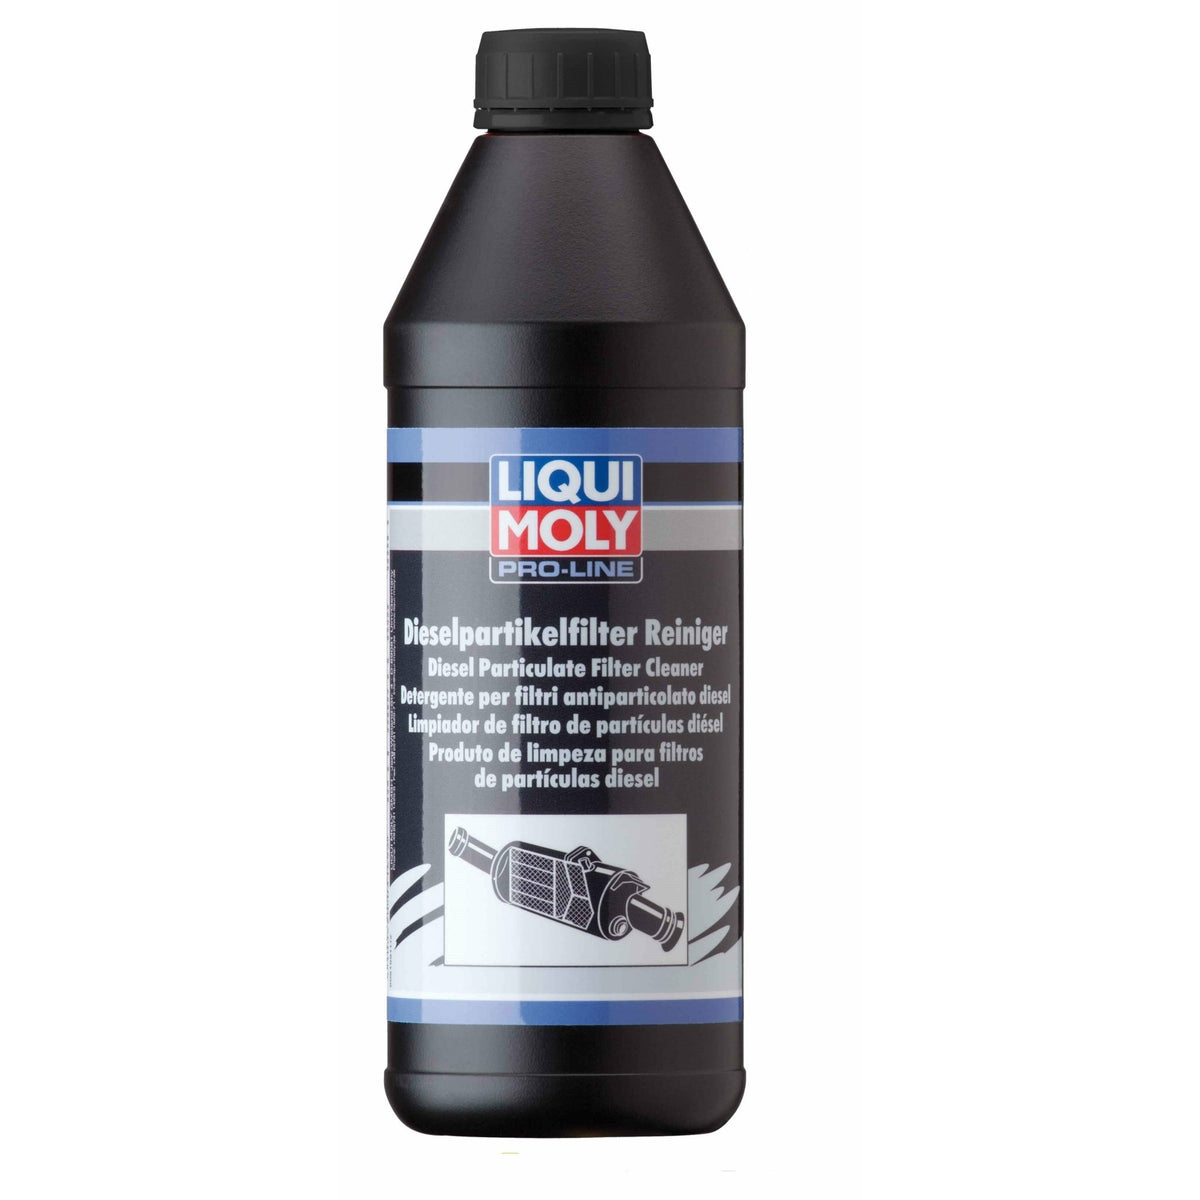 Liqui Moly DPF Diesel Particulate Filter Cleaner Pro-Line 1 L 5169 1 UNIT –  World of Lubricant